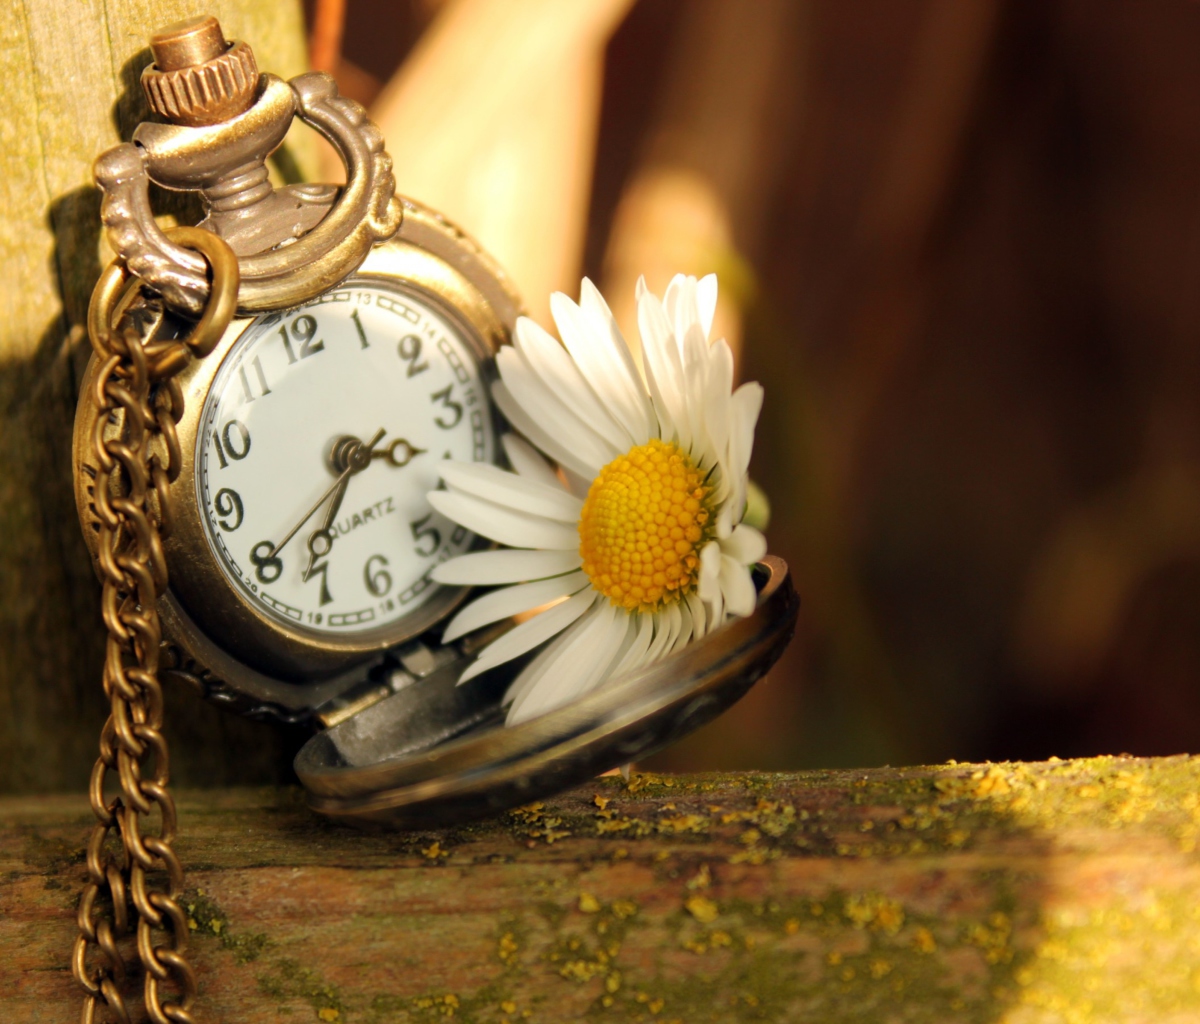 Vintage Watch And Daisy screenshot #1 1200x1024